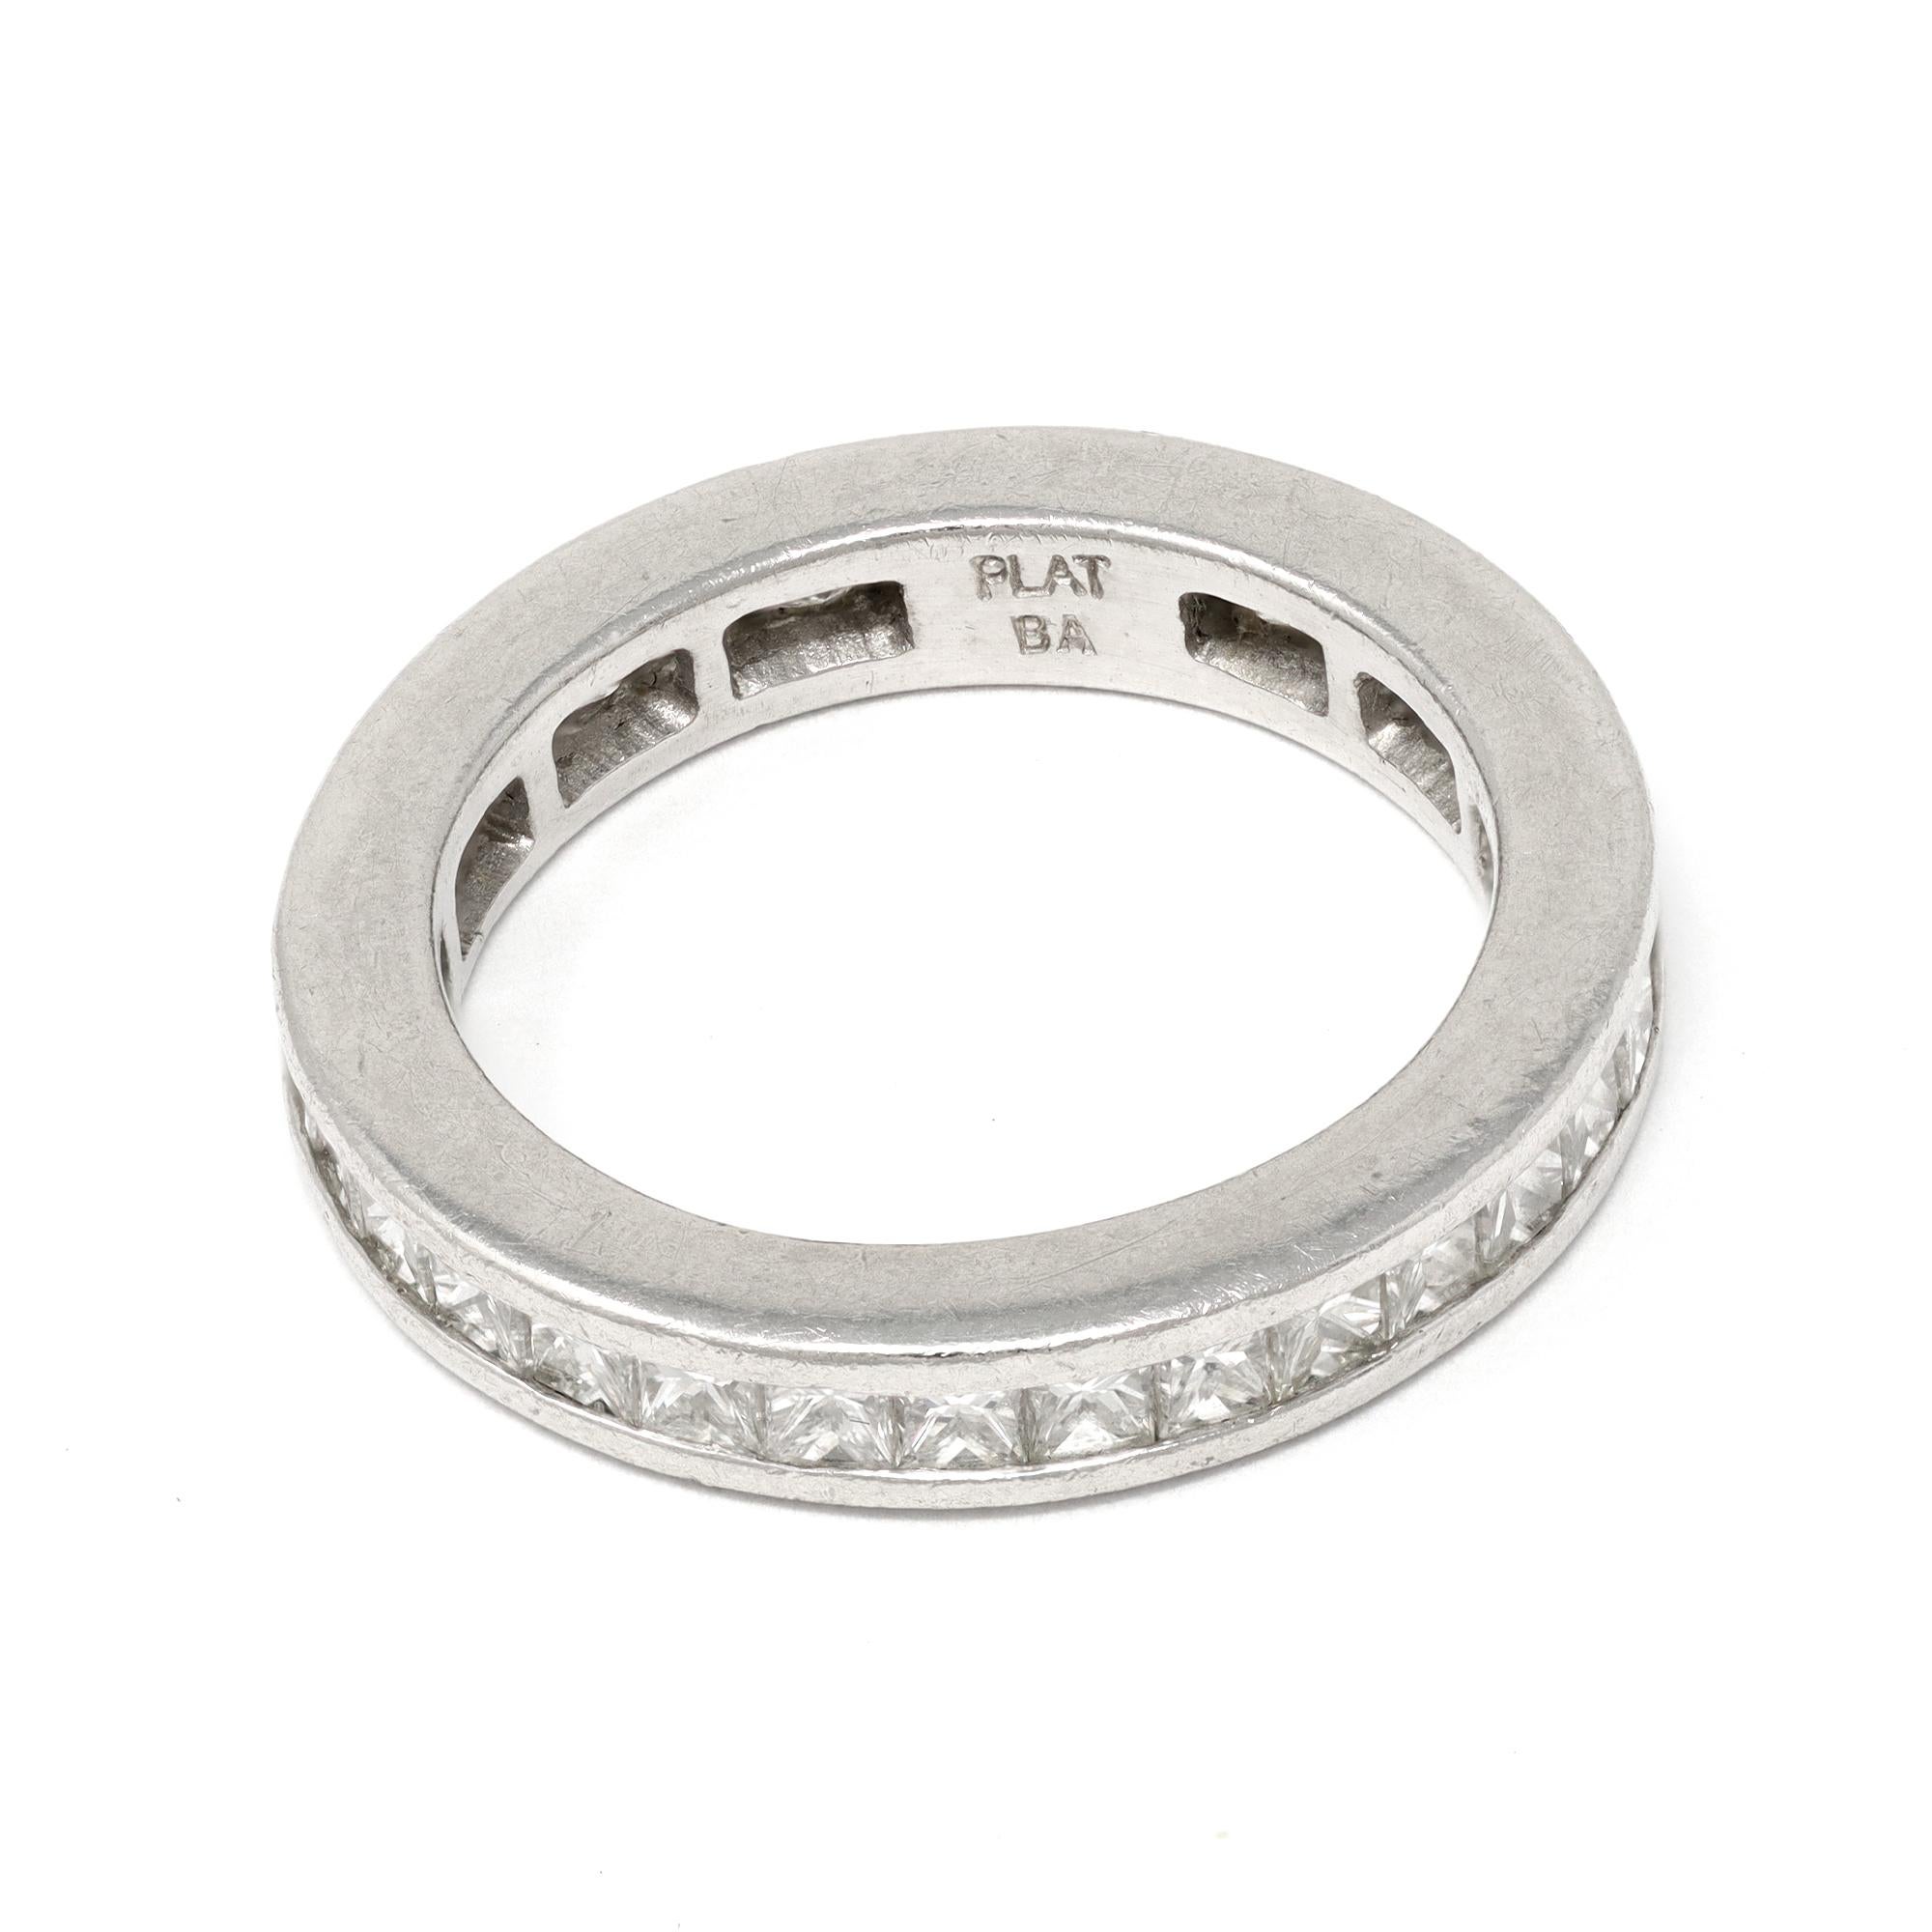 The eternity band features perfectly matching princess cut diamonds set in a channel fashion. The band was made in platinum circa 1990. The estimated weight and grade of the diamonds are 3 carats of GH color and VS clarity. The ring will fit a size